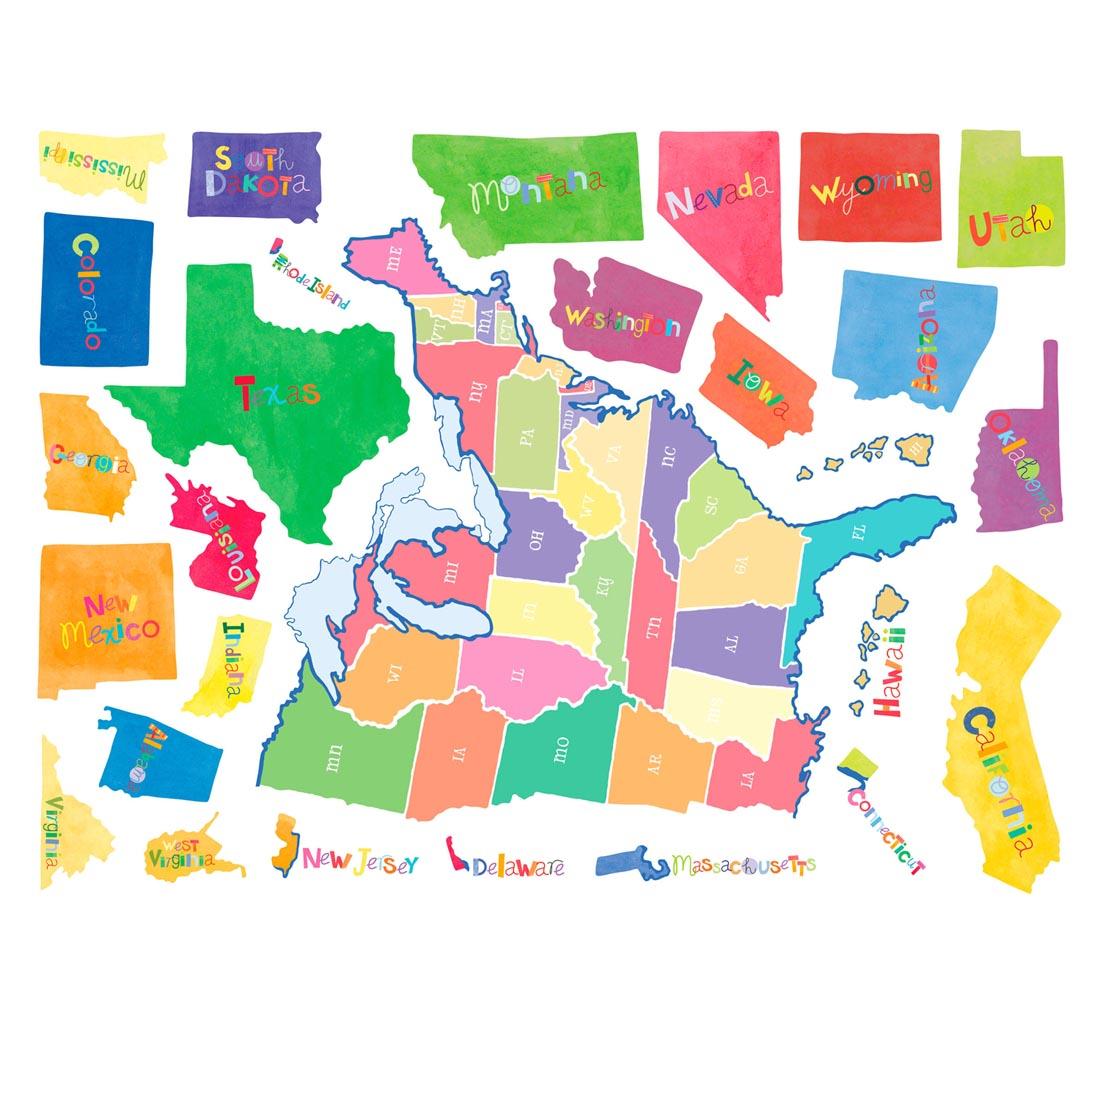 One half of Wallies US State Map with several Vinyl Decals